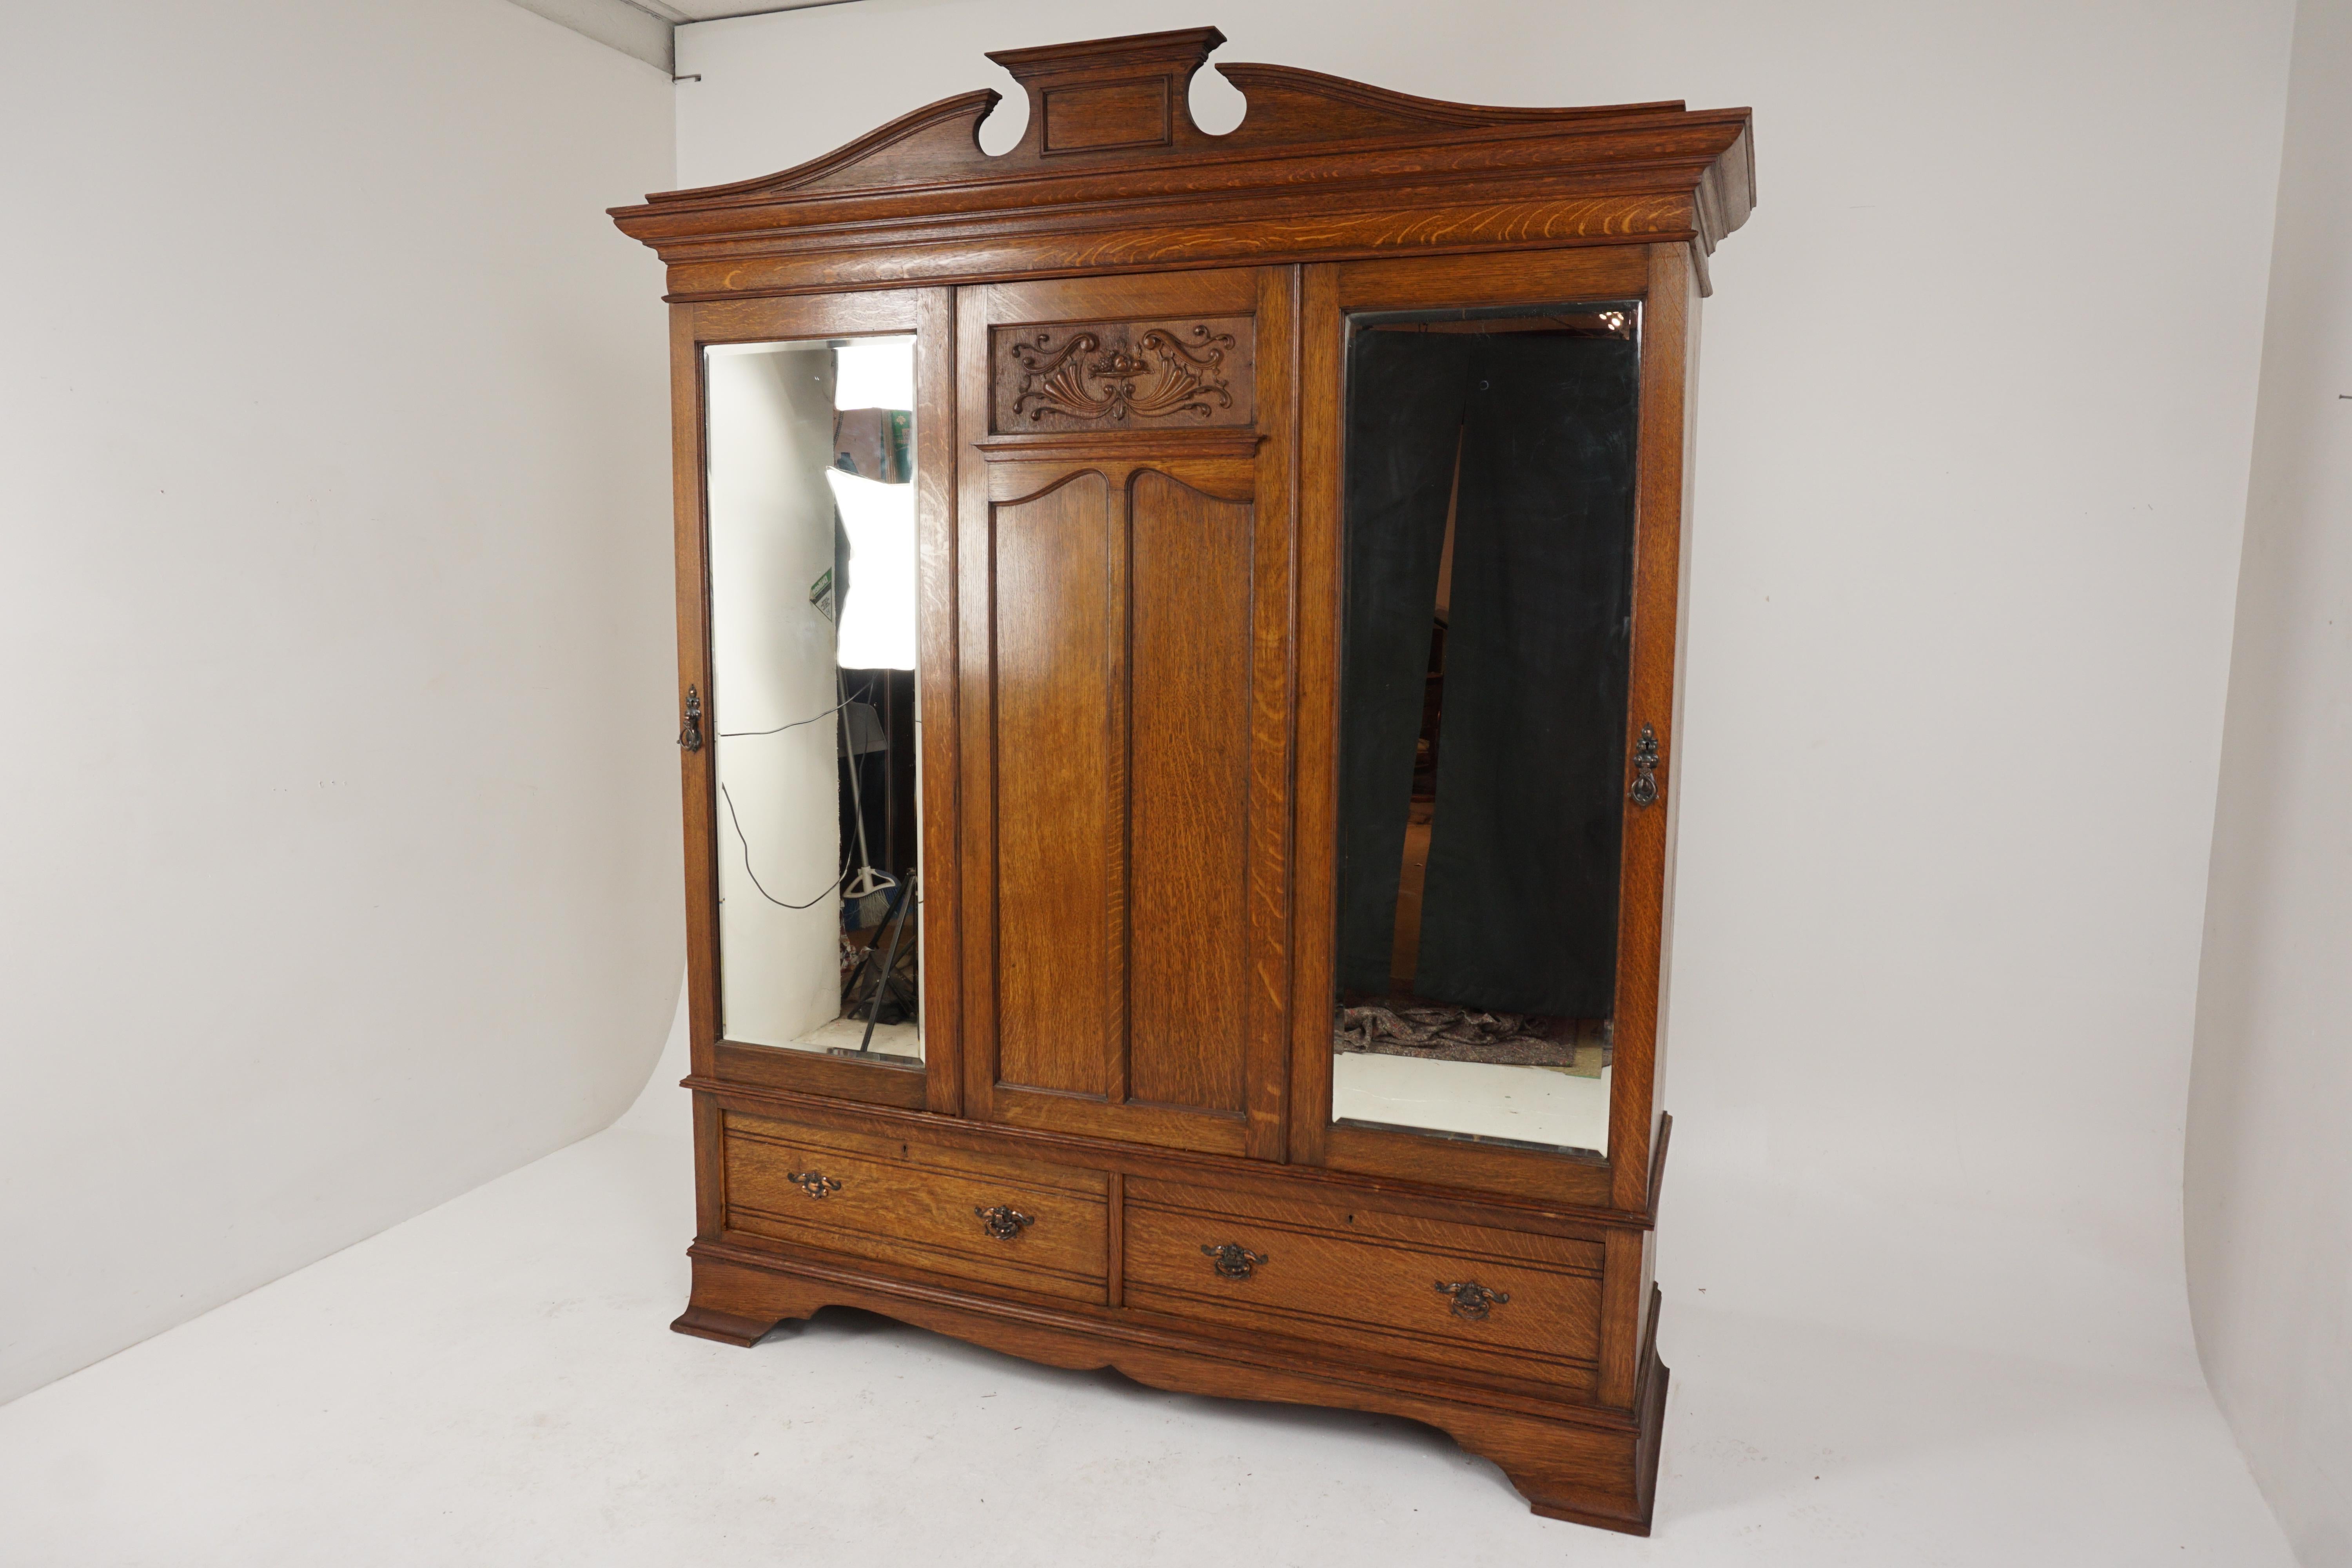 Aesthetic movement tiger oak armoire, Maple + Co. London, England 1900, H539

England 1900 
Solid oak
Original Finish
Moulded cornice on top
Carved paneled center doors
Flanked by a pair of beveled mirrored doors
Fitted interior with brass rod and